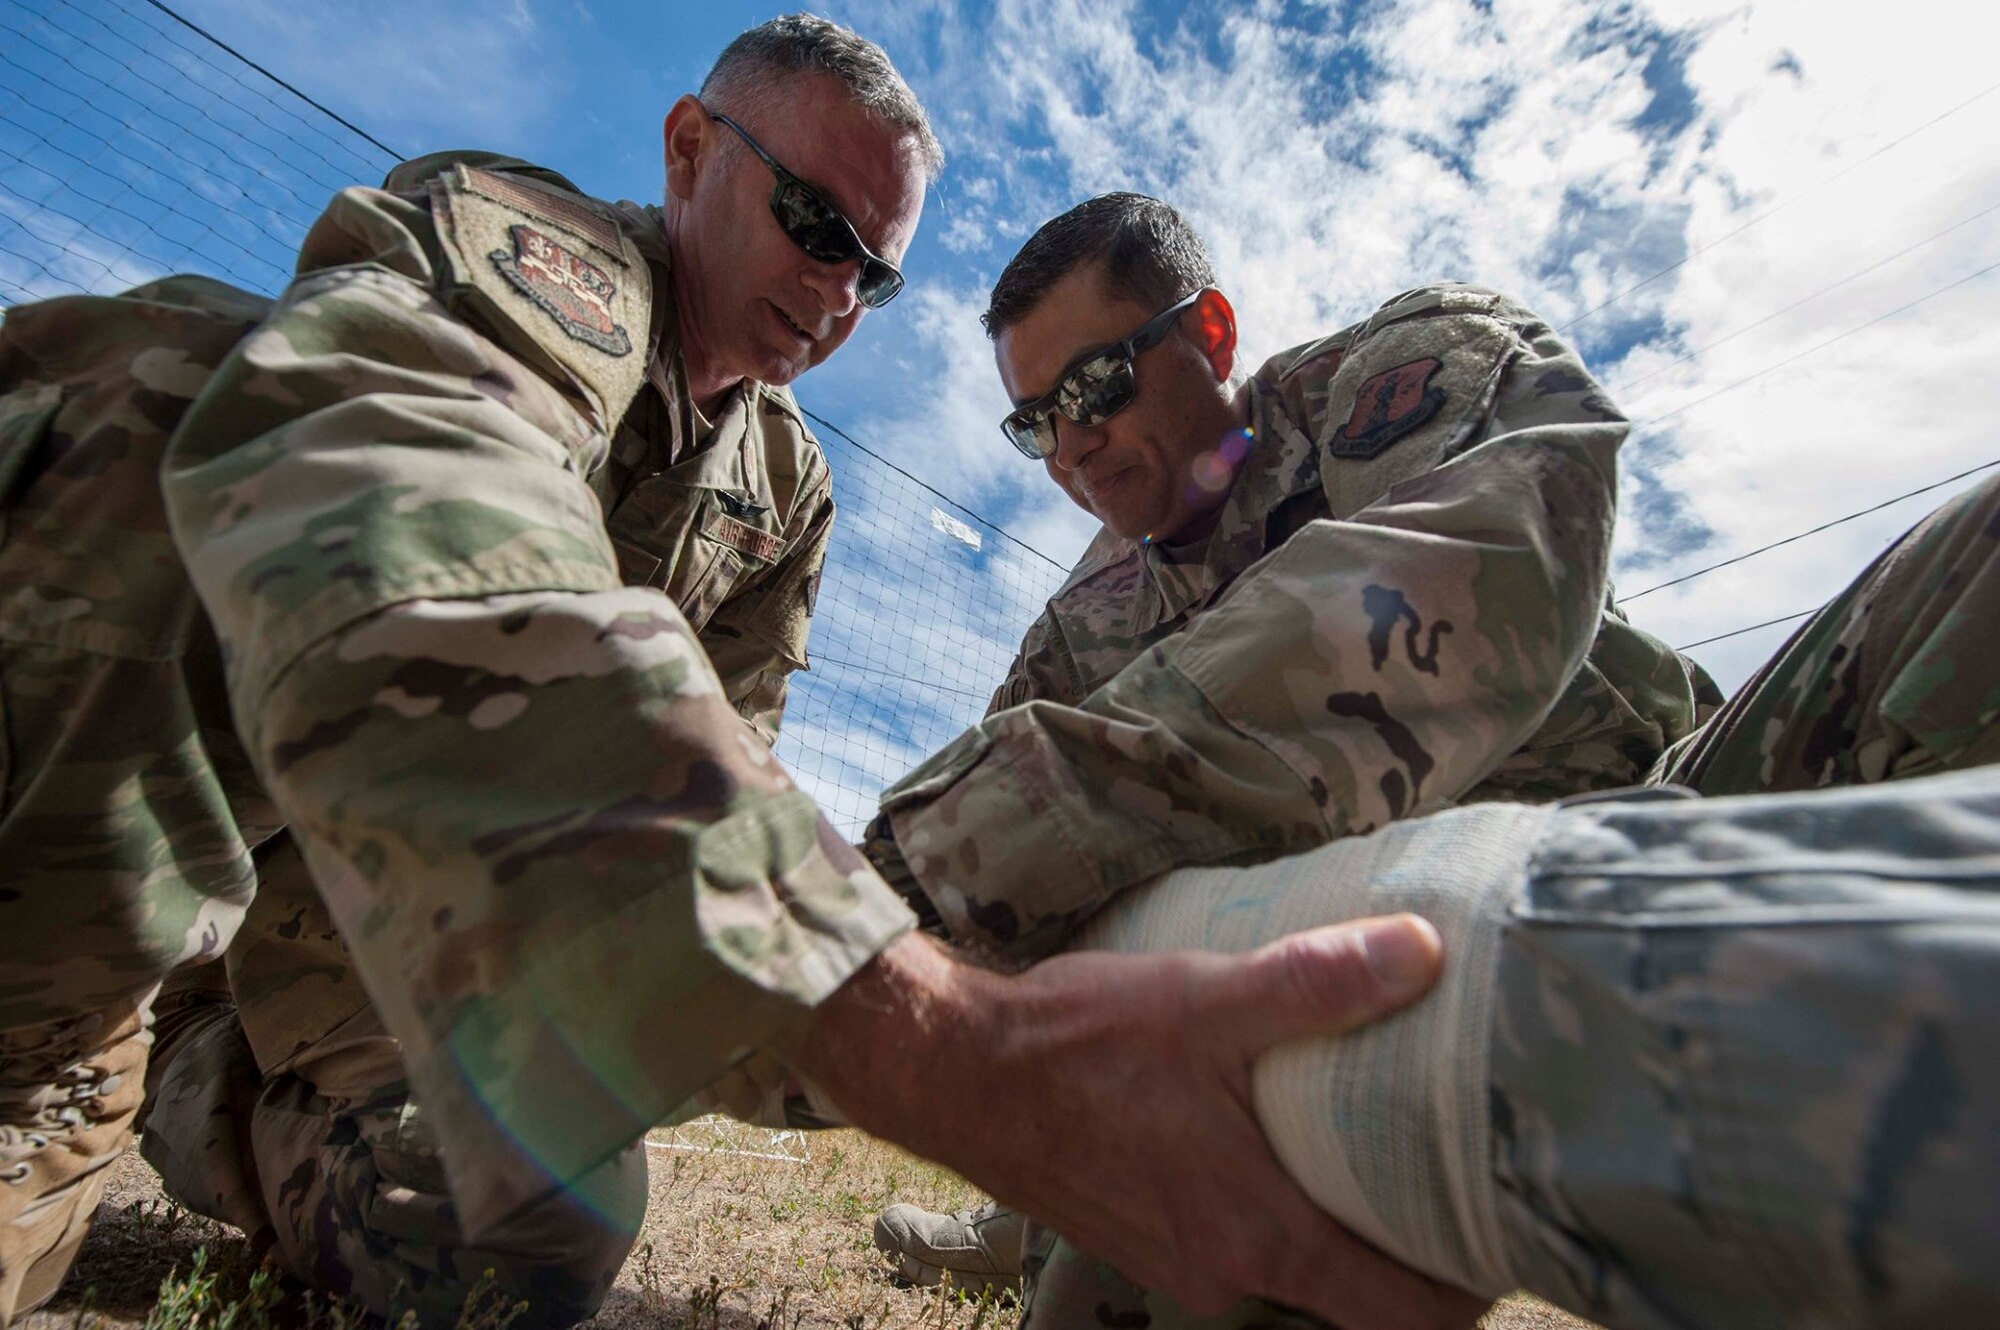 Maj. Christopher Lopes and Tech. Sgt. John Castillo, both members, assigned to the 149th Medical Group, apply a splint to an actor during Tactical Combat Casualty Care training at Coast Guard Station Lake Tahoe, Nevada June 16.